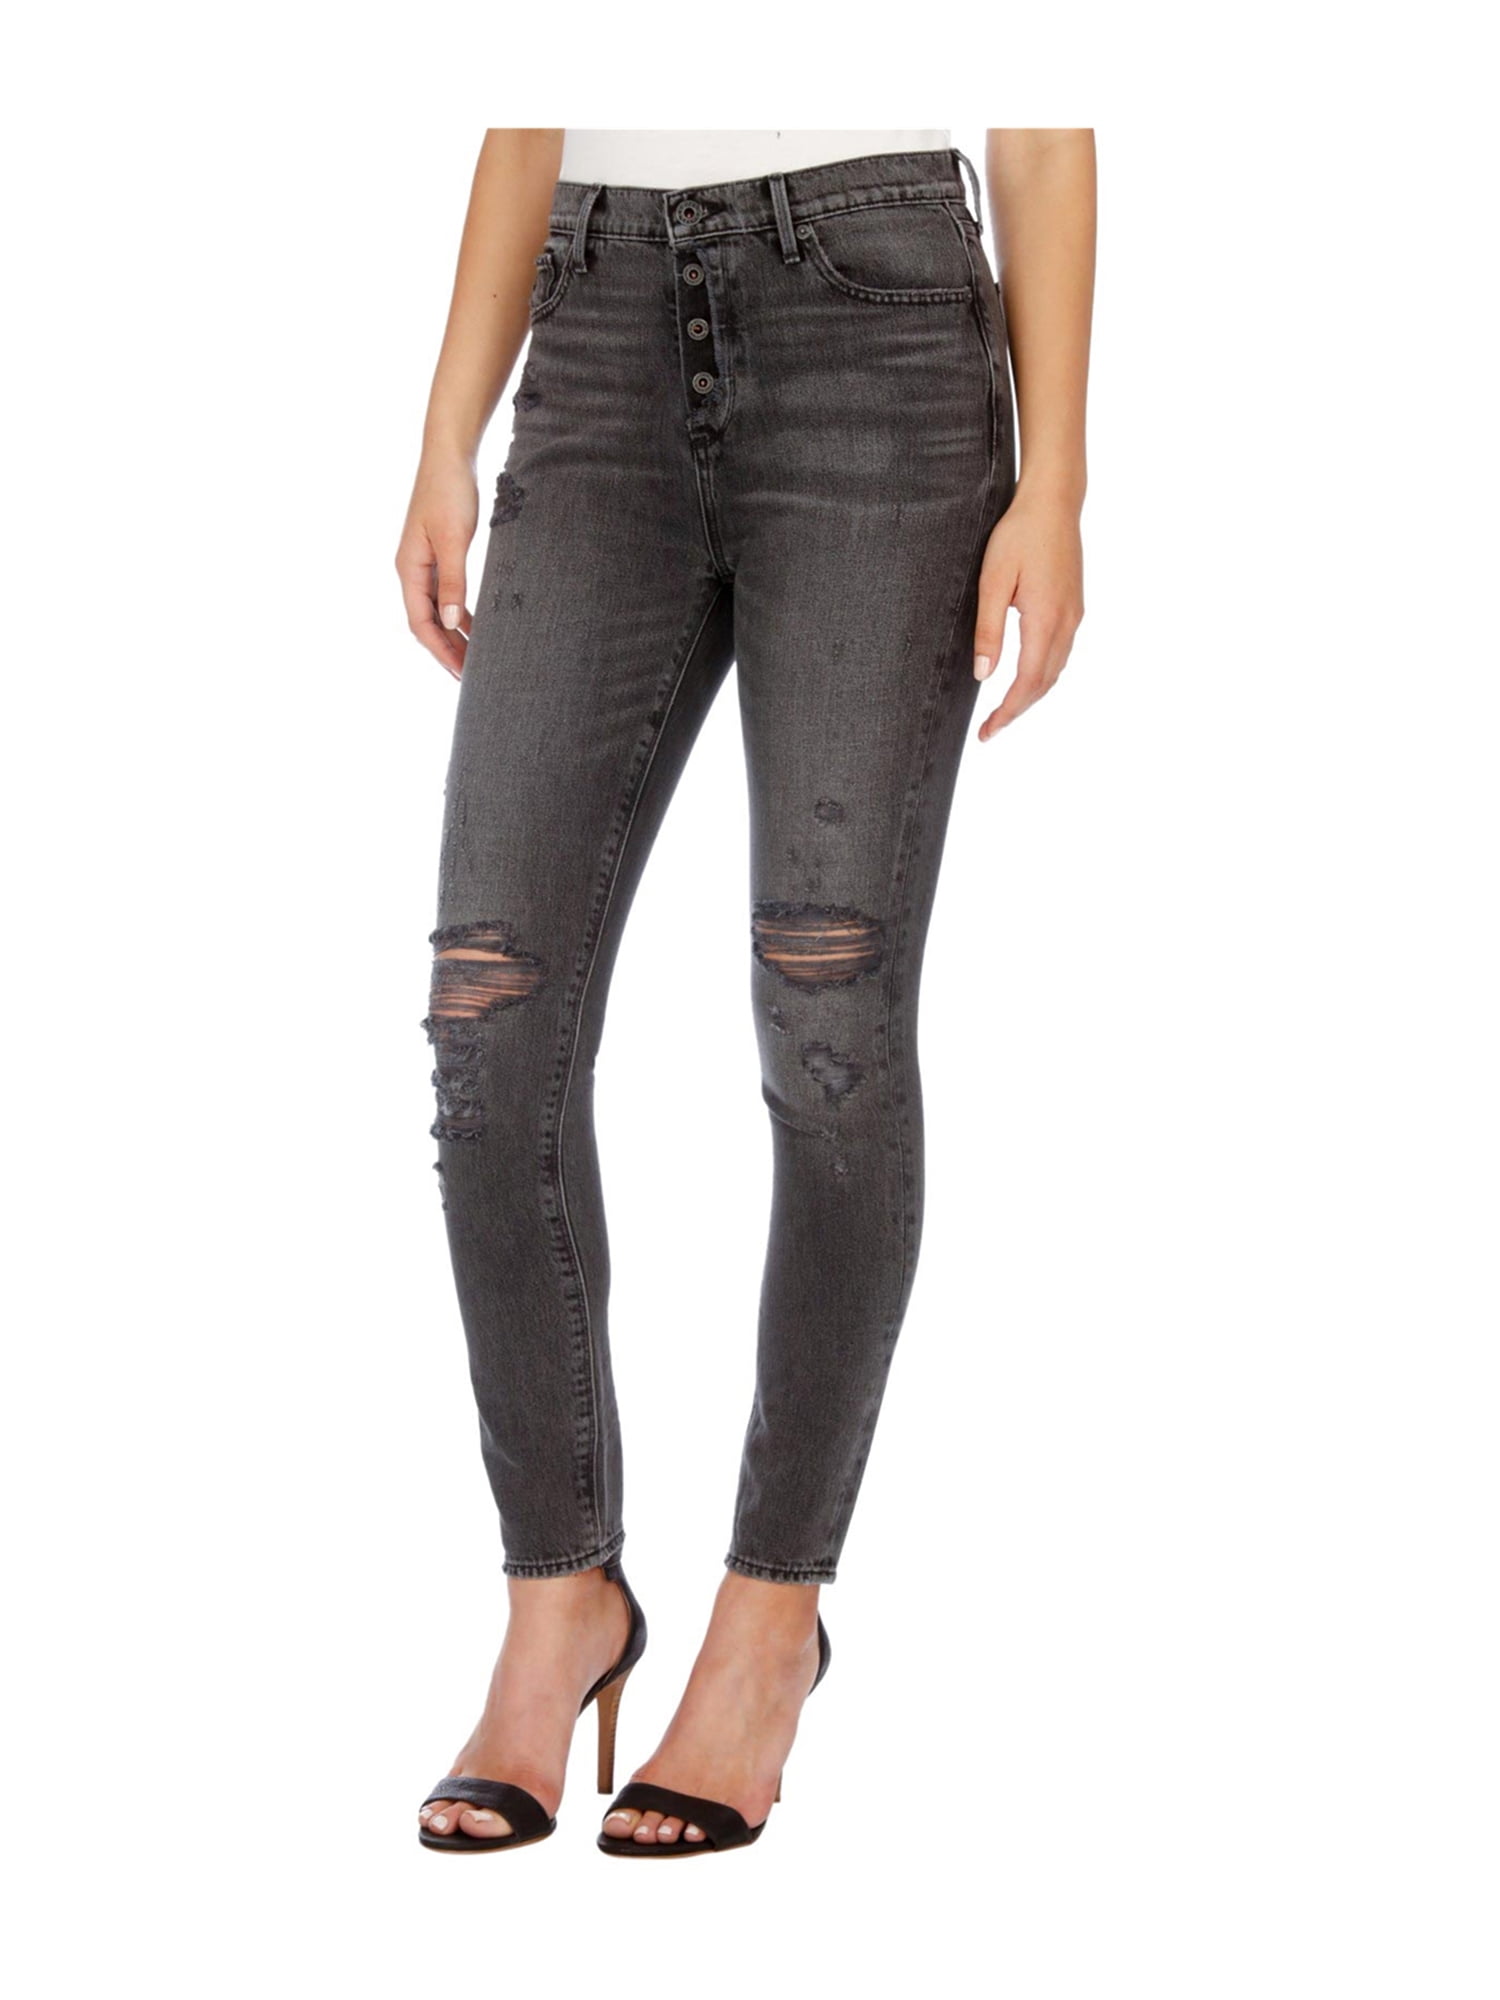 lucky brand button fly women's jeans